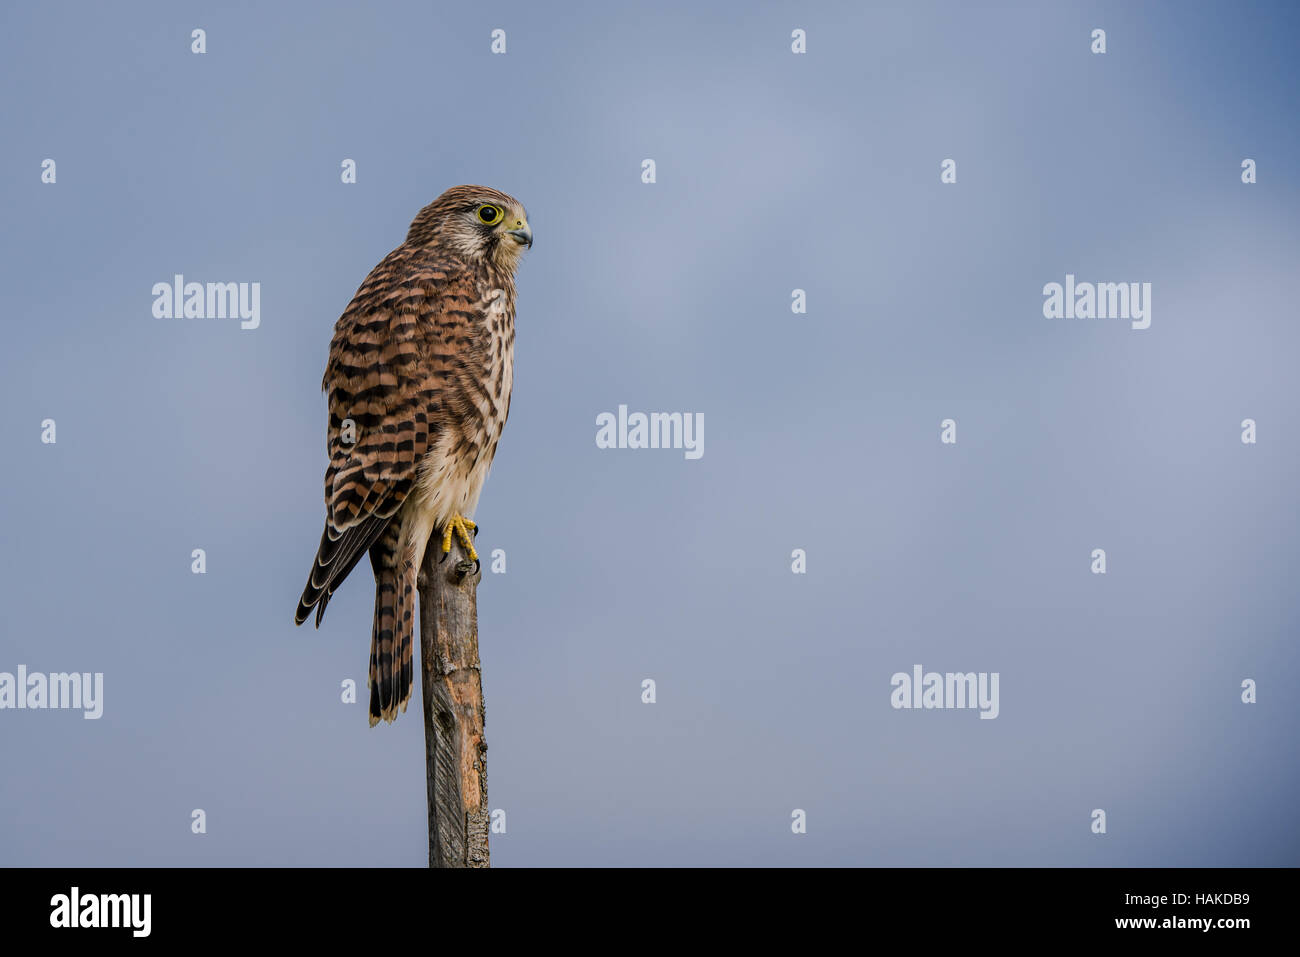 The beautiful kestrel (Falco tinnunculus) in an usual position when hunting for vole, on top of a roundpole fence Stock Photo